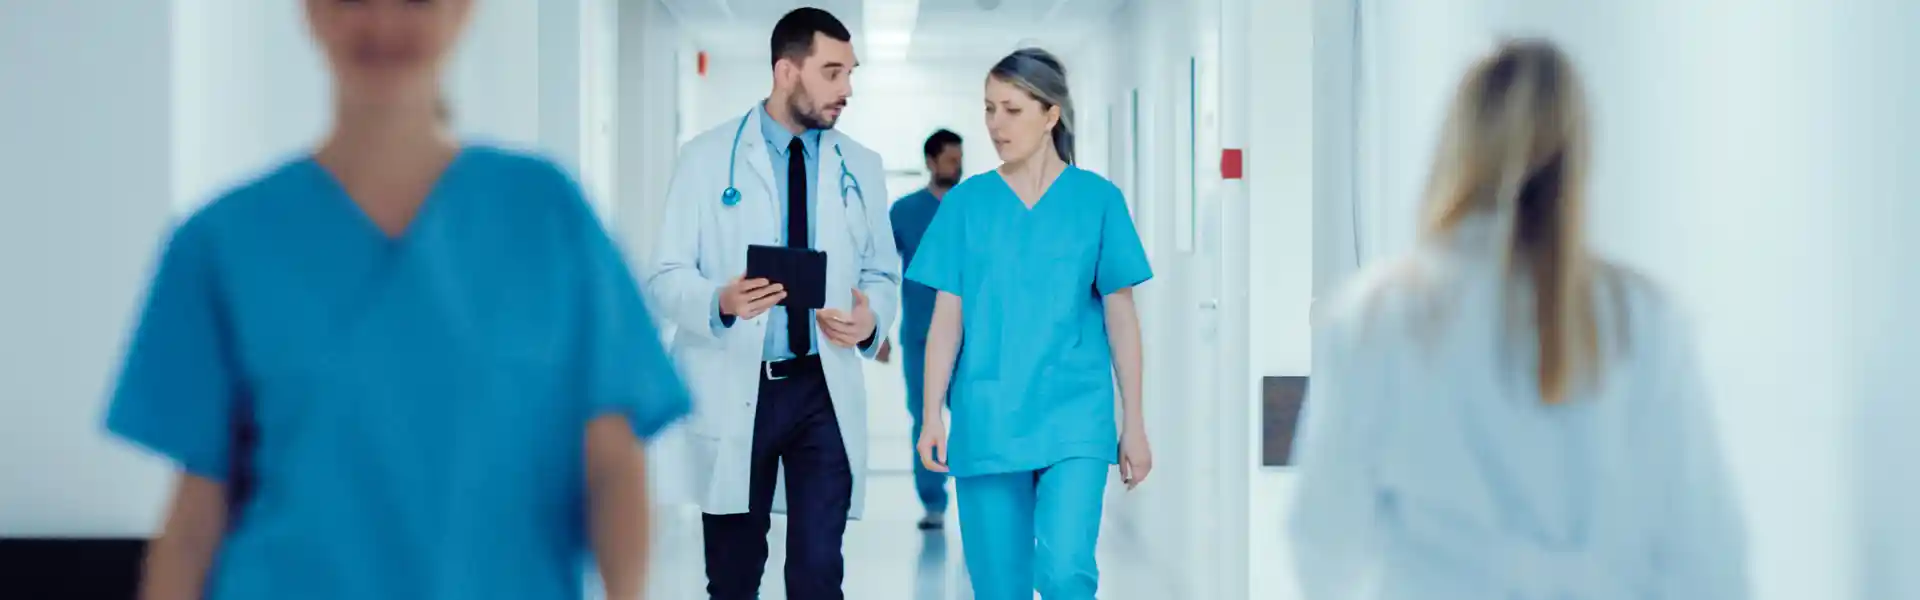 surgeon-and-female-doctor-walk-through-hospital-hallway--they-consult